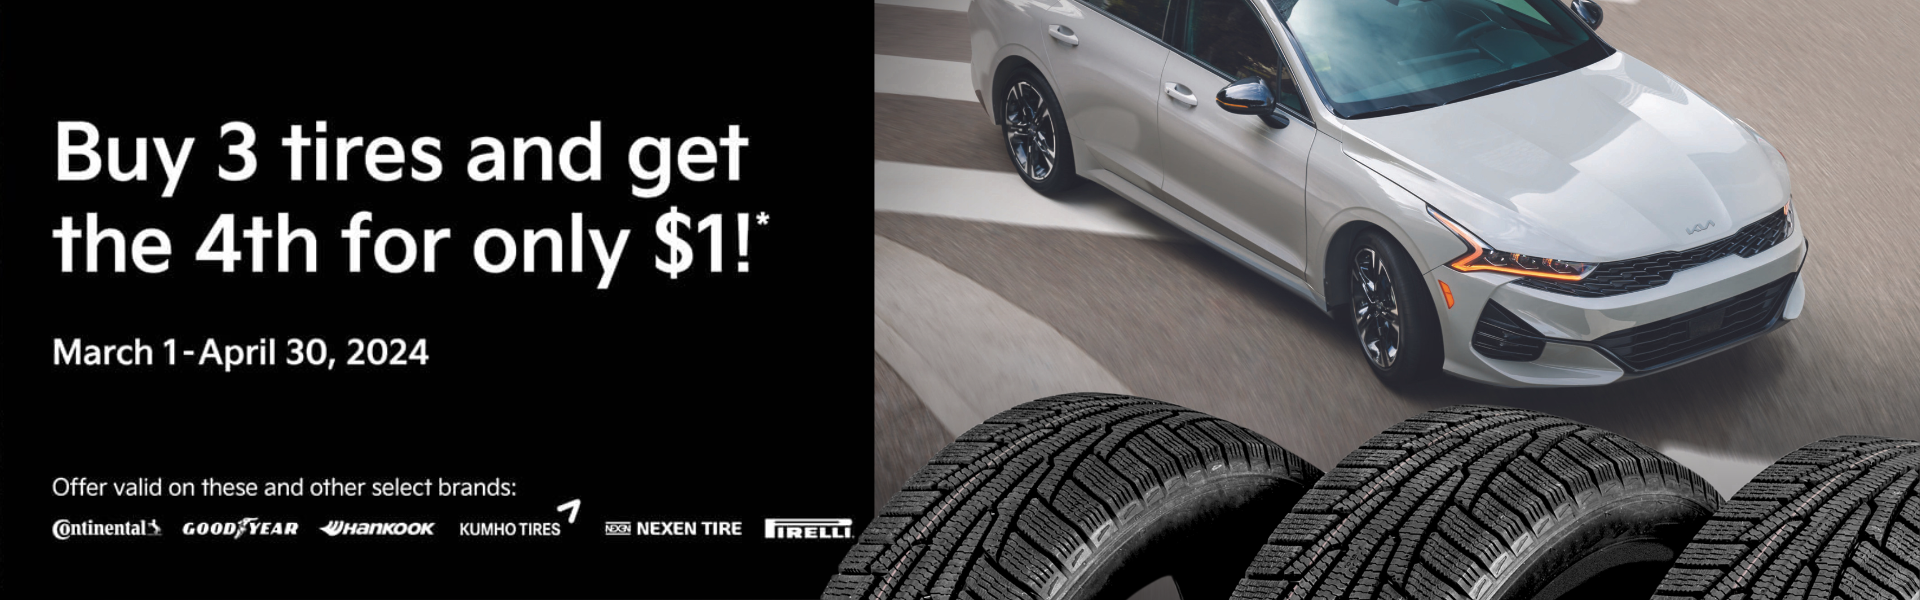 Tire Offers